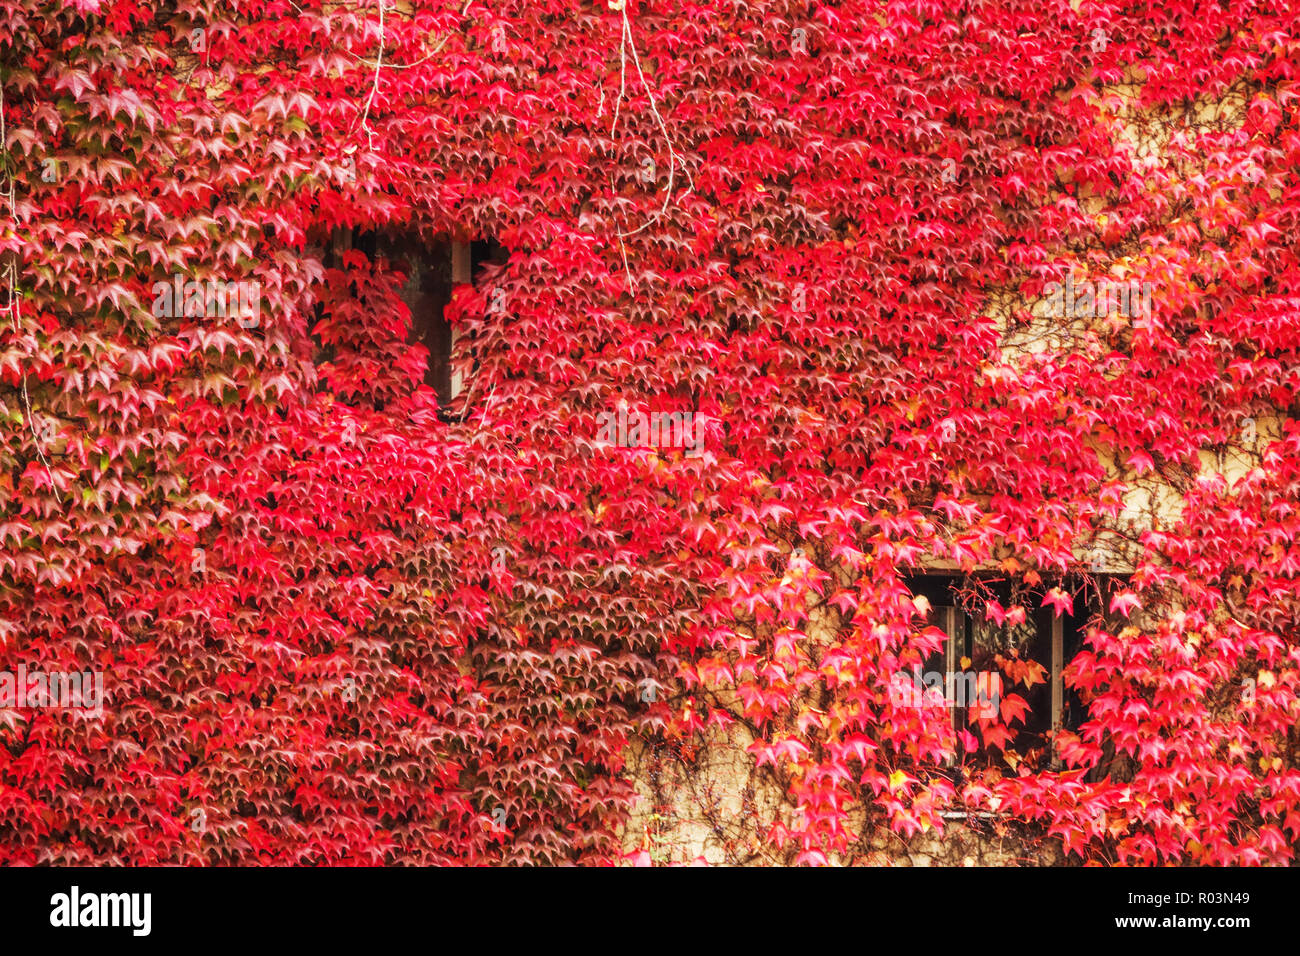 Boston Ivy window Parthenocissus tricuspidata growing on a wall of house, Vienna Austria autumn red leaves climbing plant climber autumn colours Stock Photo